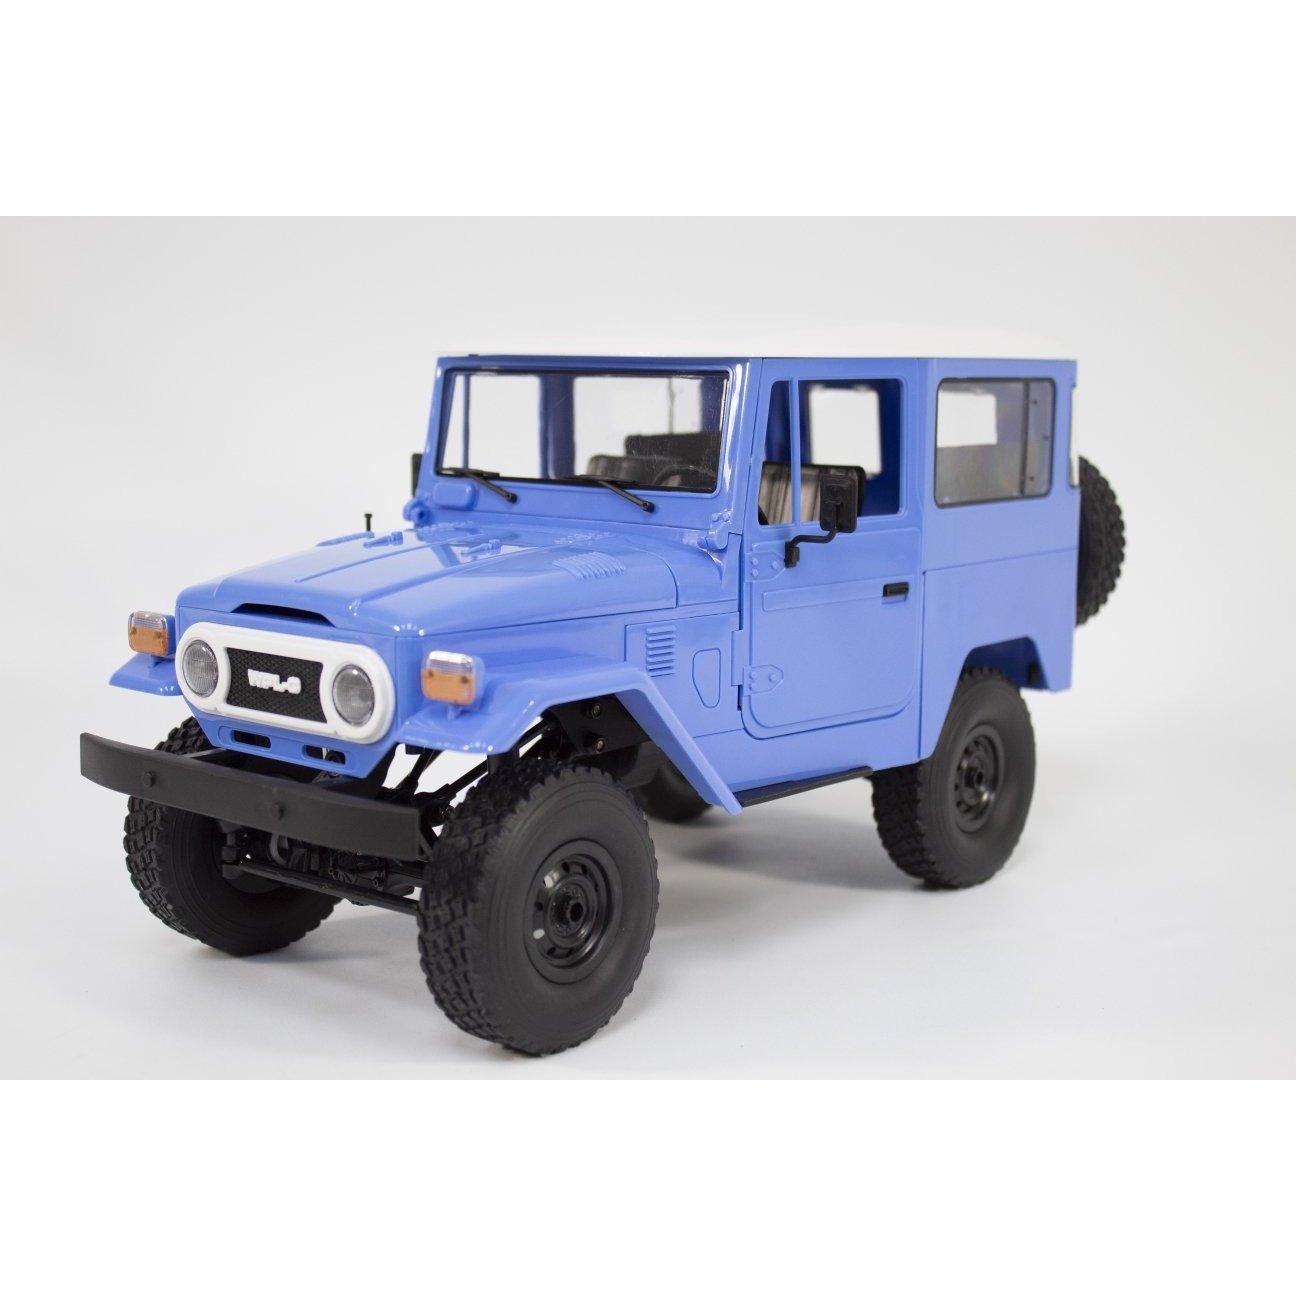 Land Cruiser 4x4 1:16th Scale KIT RC Truck (Metal Upgrades)